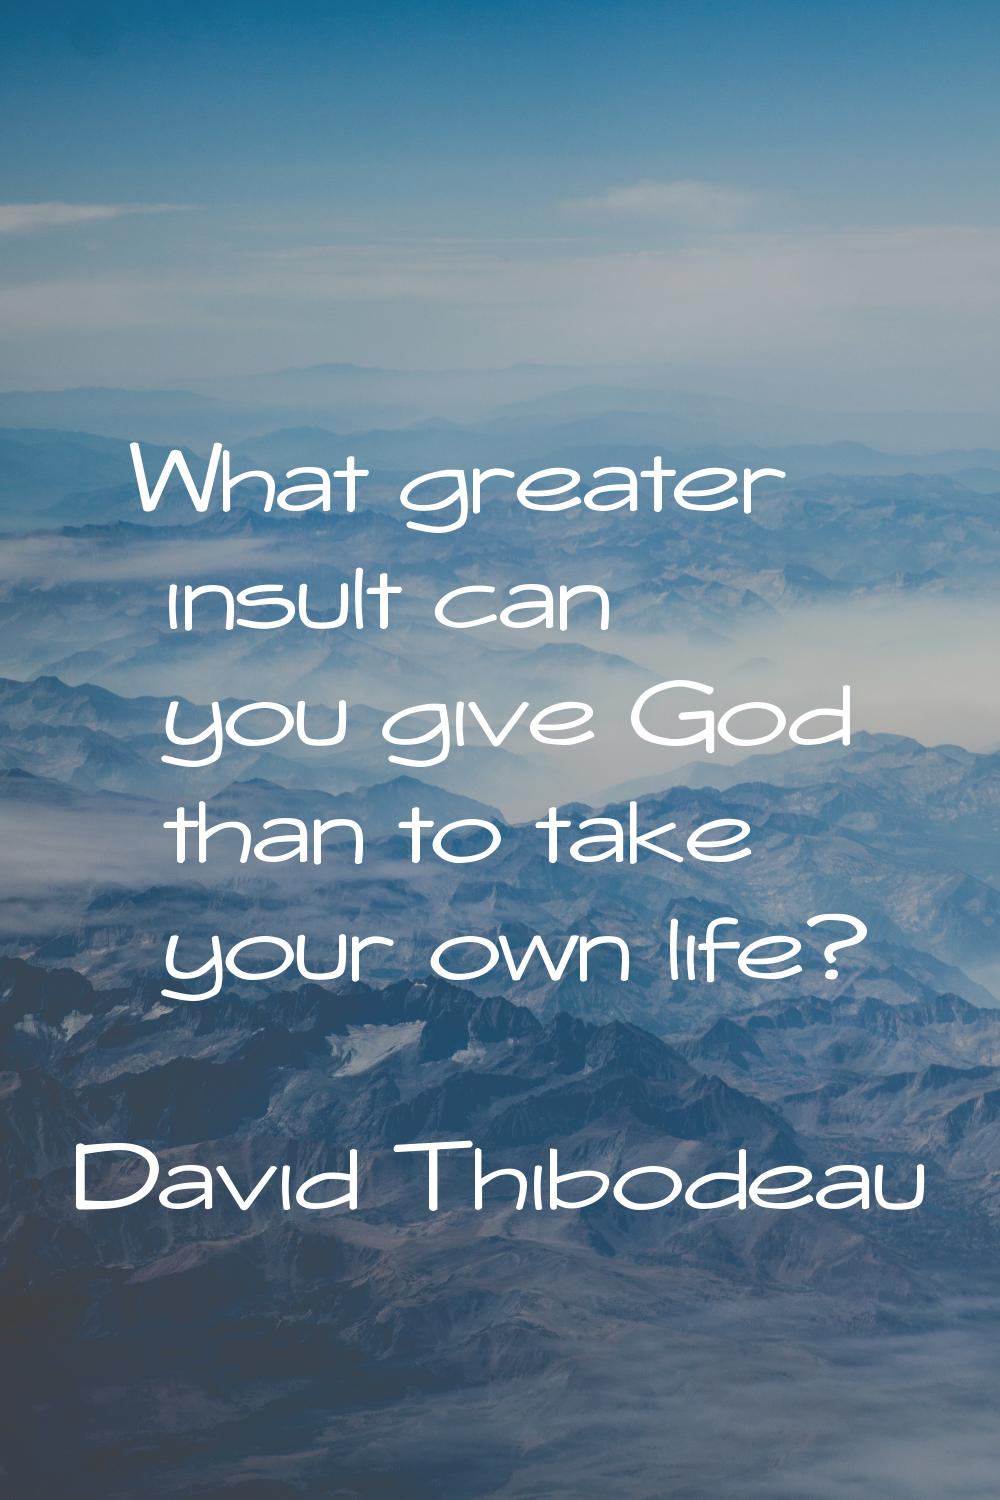 What greater insult can you give God than to take your own life?